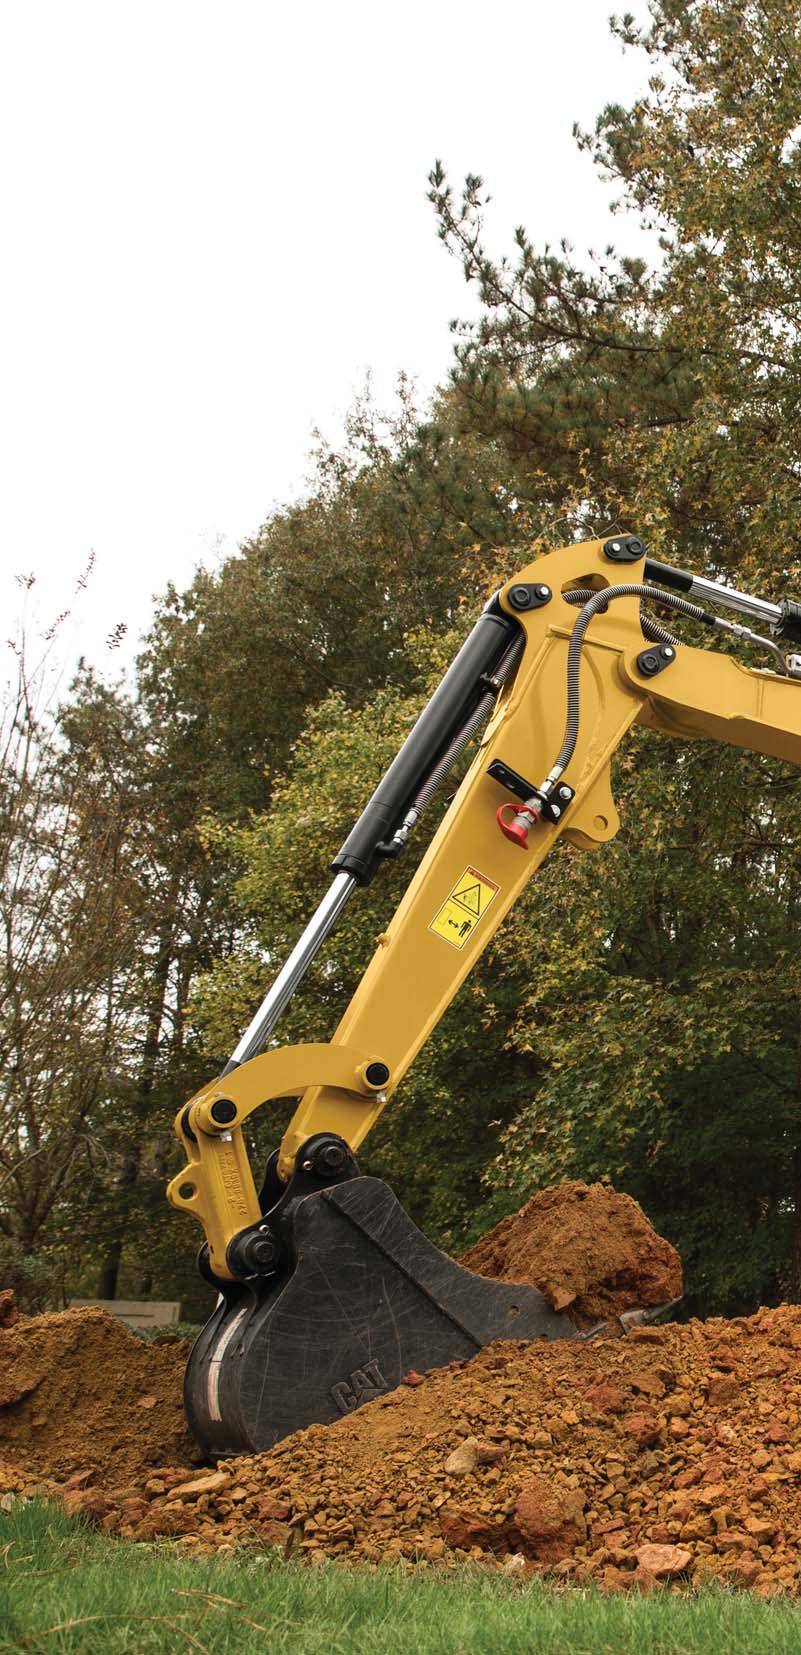 The Cat 303E CR Mini Hydraulic Excavator delivers high performance, durability and versatility in a compact design to help you work in a variety of applications.